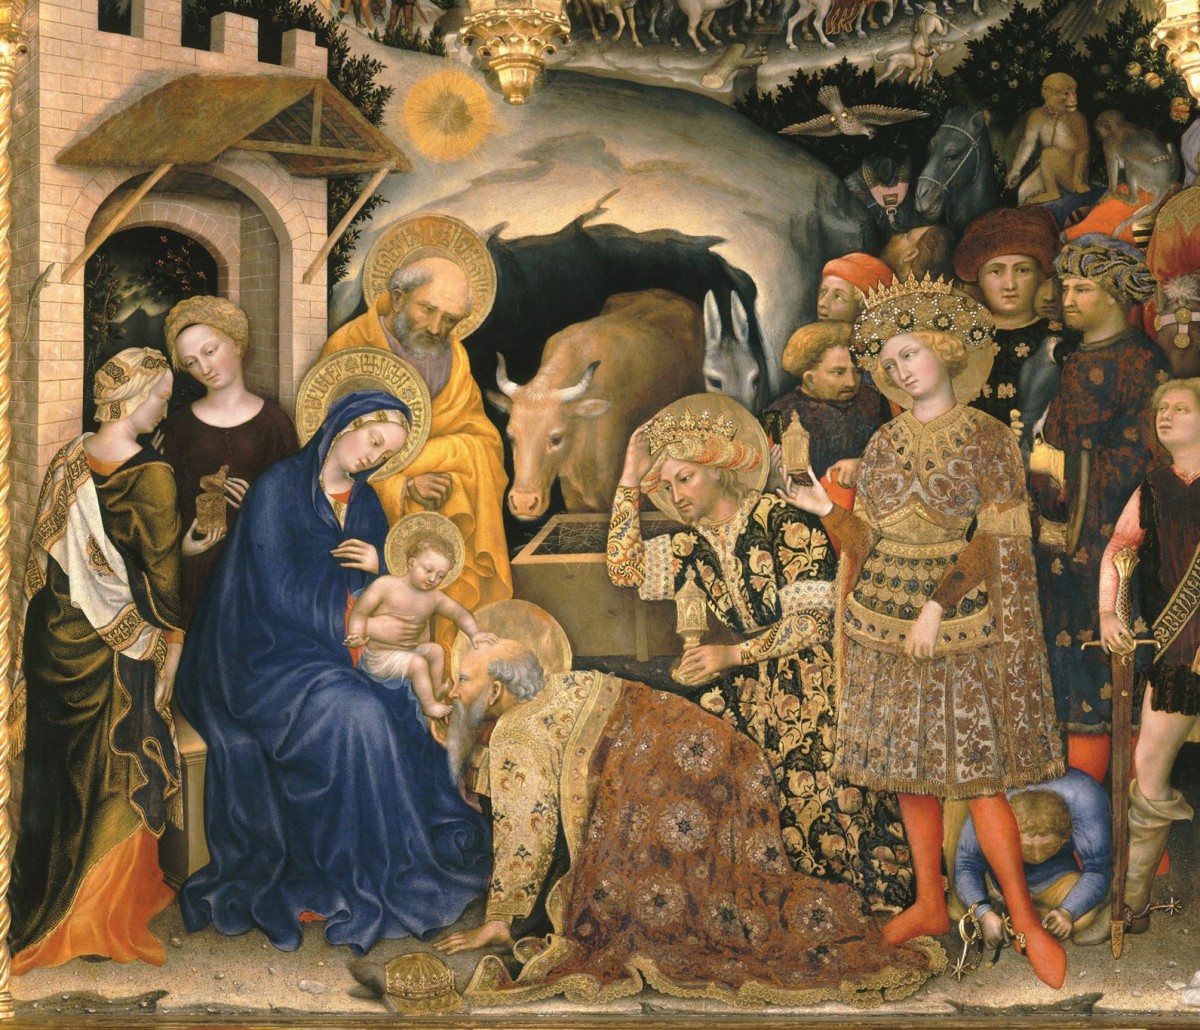 Arabic-style script can be seen on the clothing of some of the figures in "Adoration of the Magi", a 1423 painting by Gentile da Fabriano (Reproduced by permission of Interlink Publishing)